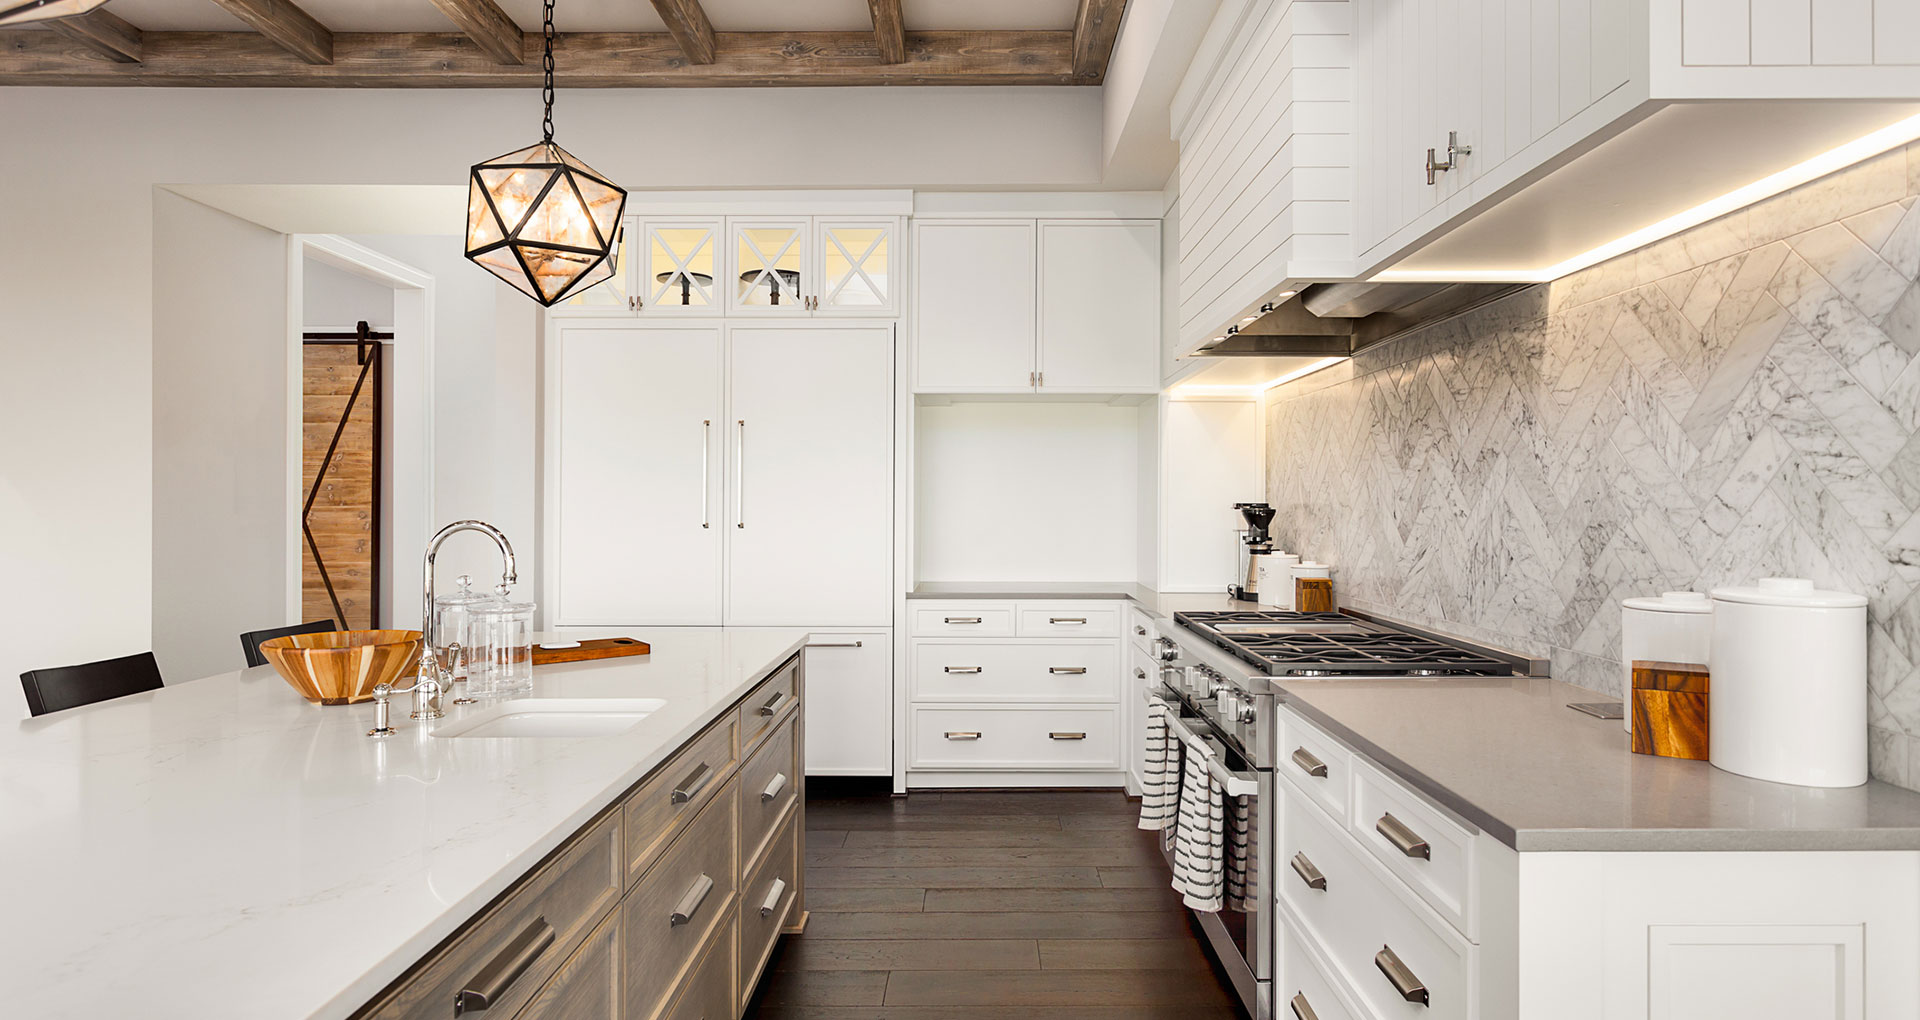 A clean and functional kitchen is vital to make your house perfect